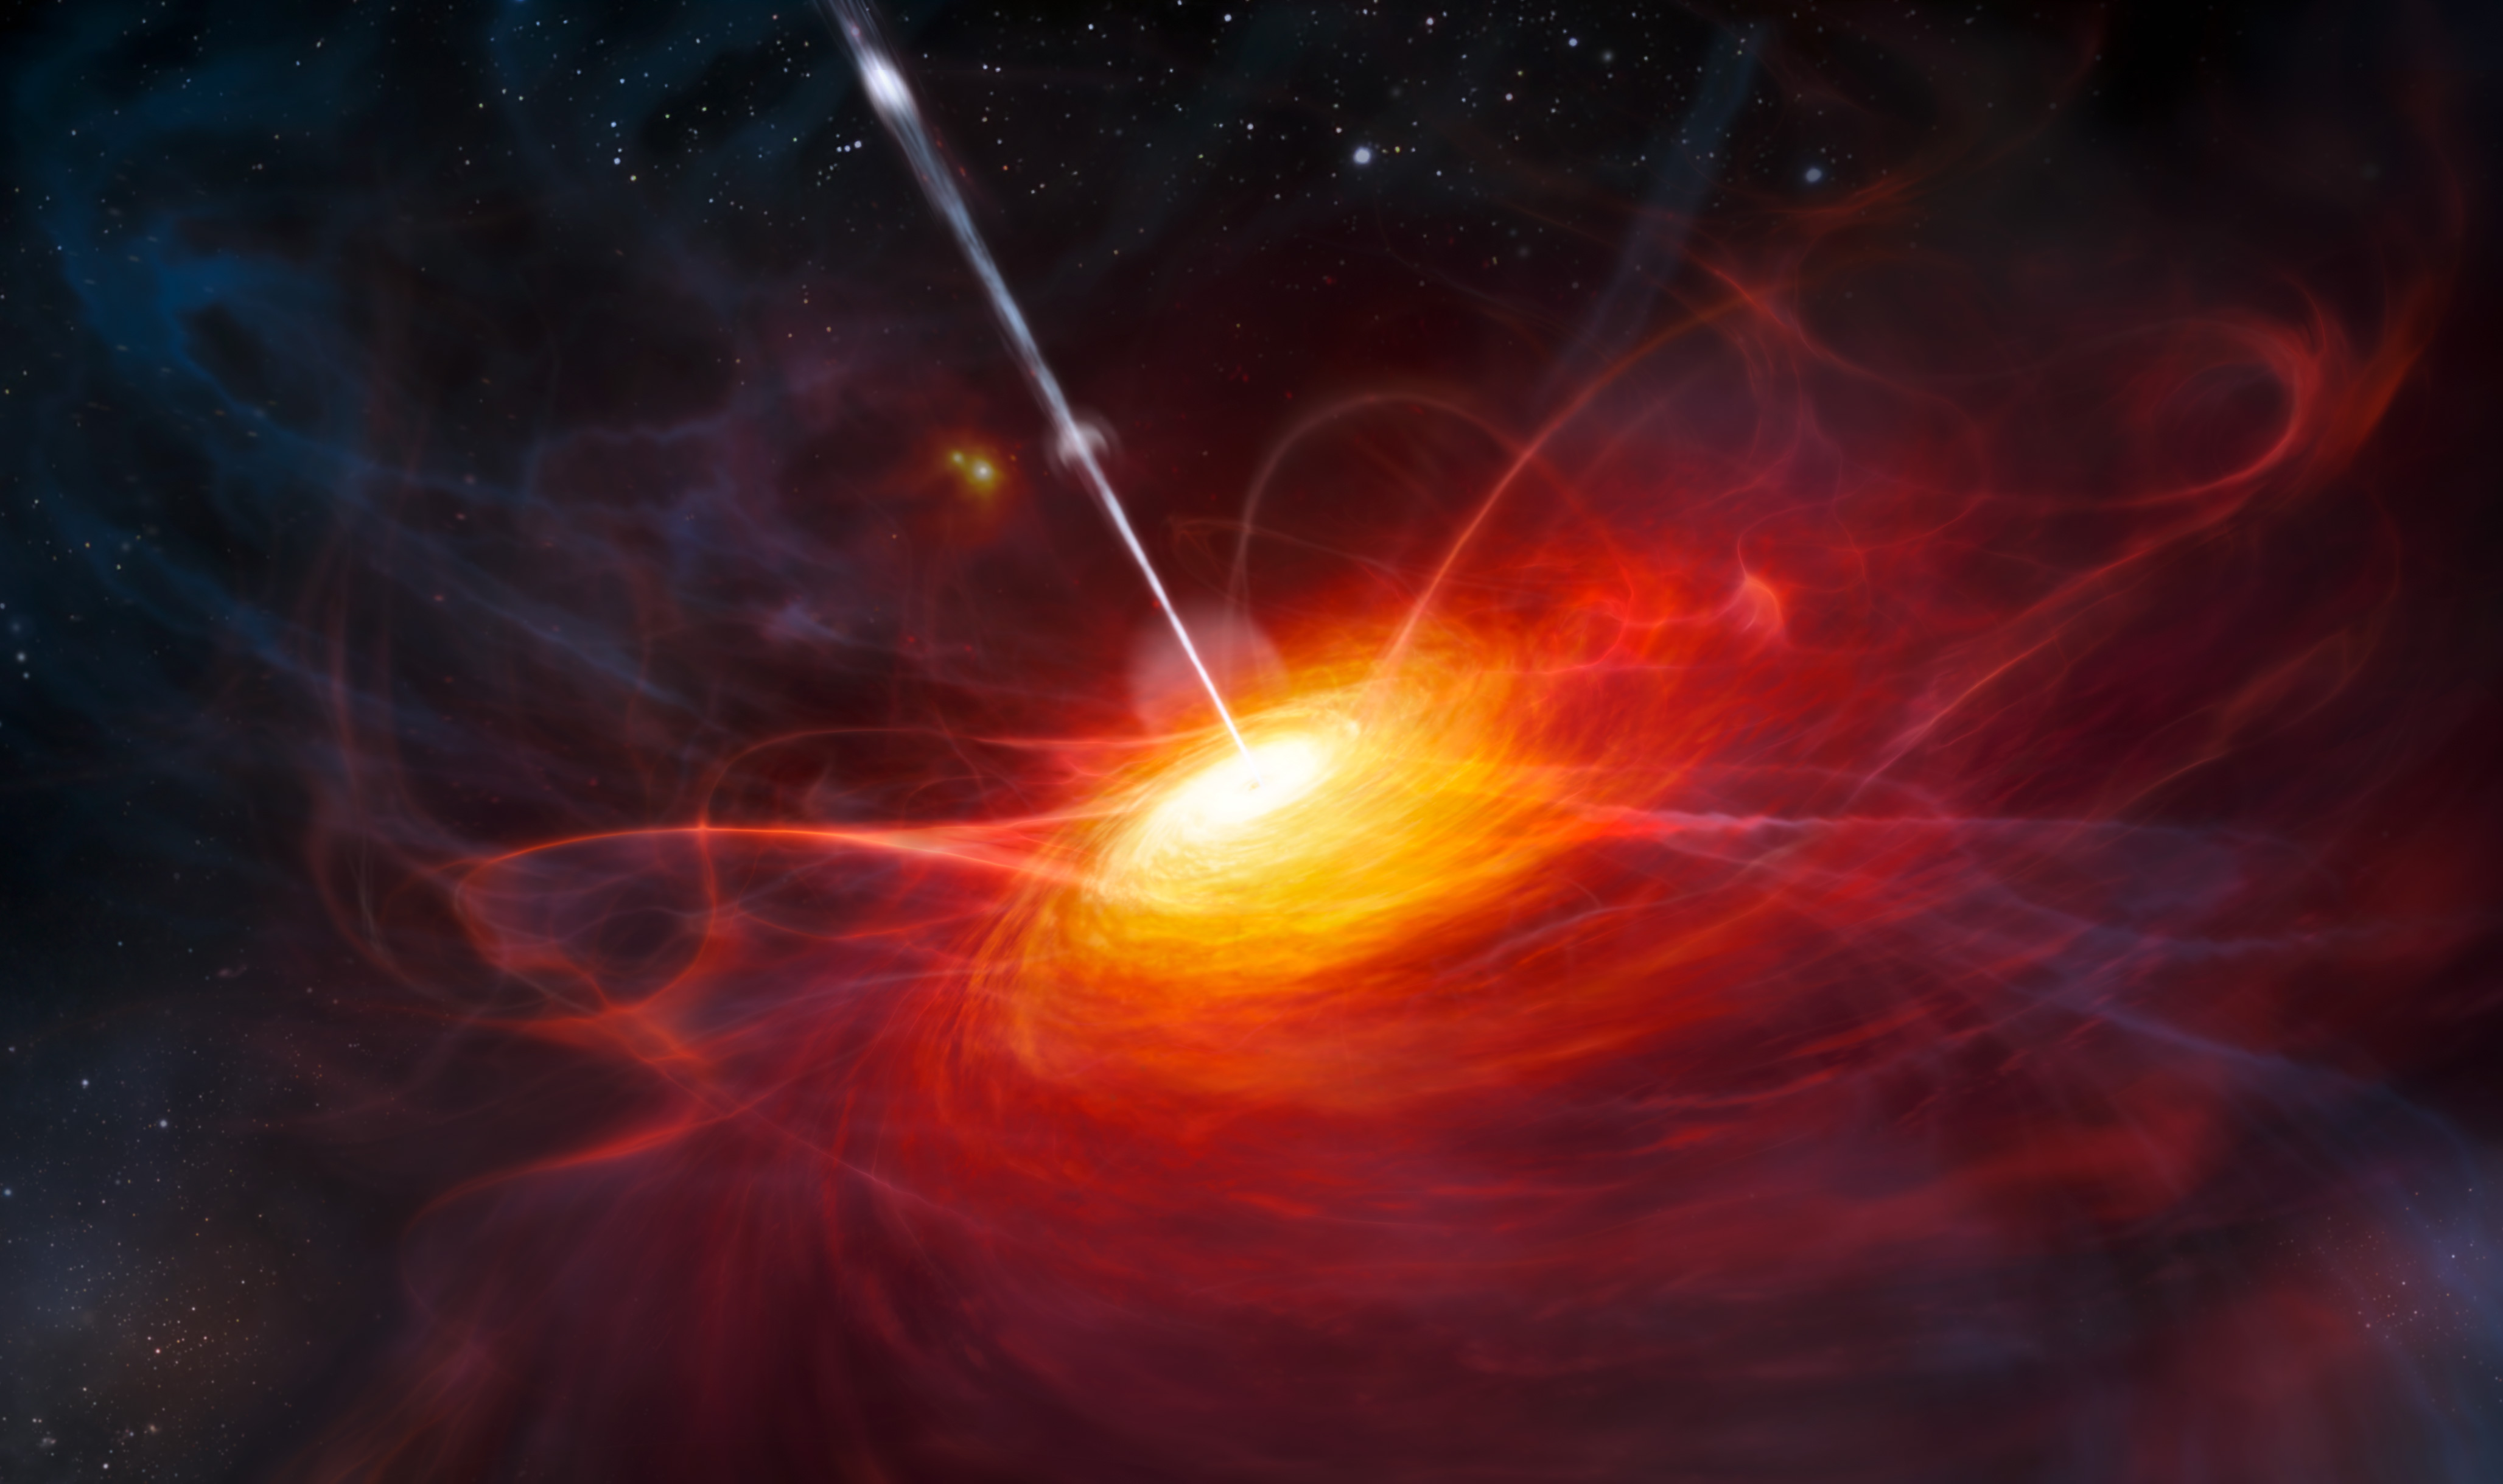 Image: Some black holes bring dead “zombie” stars back to life just to rip them apart later